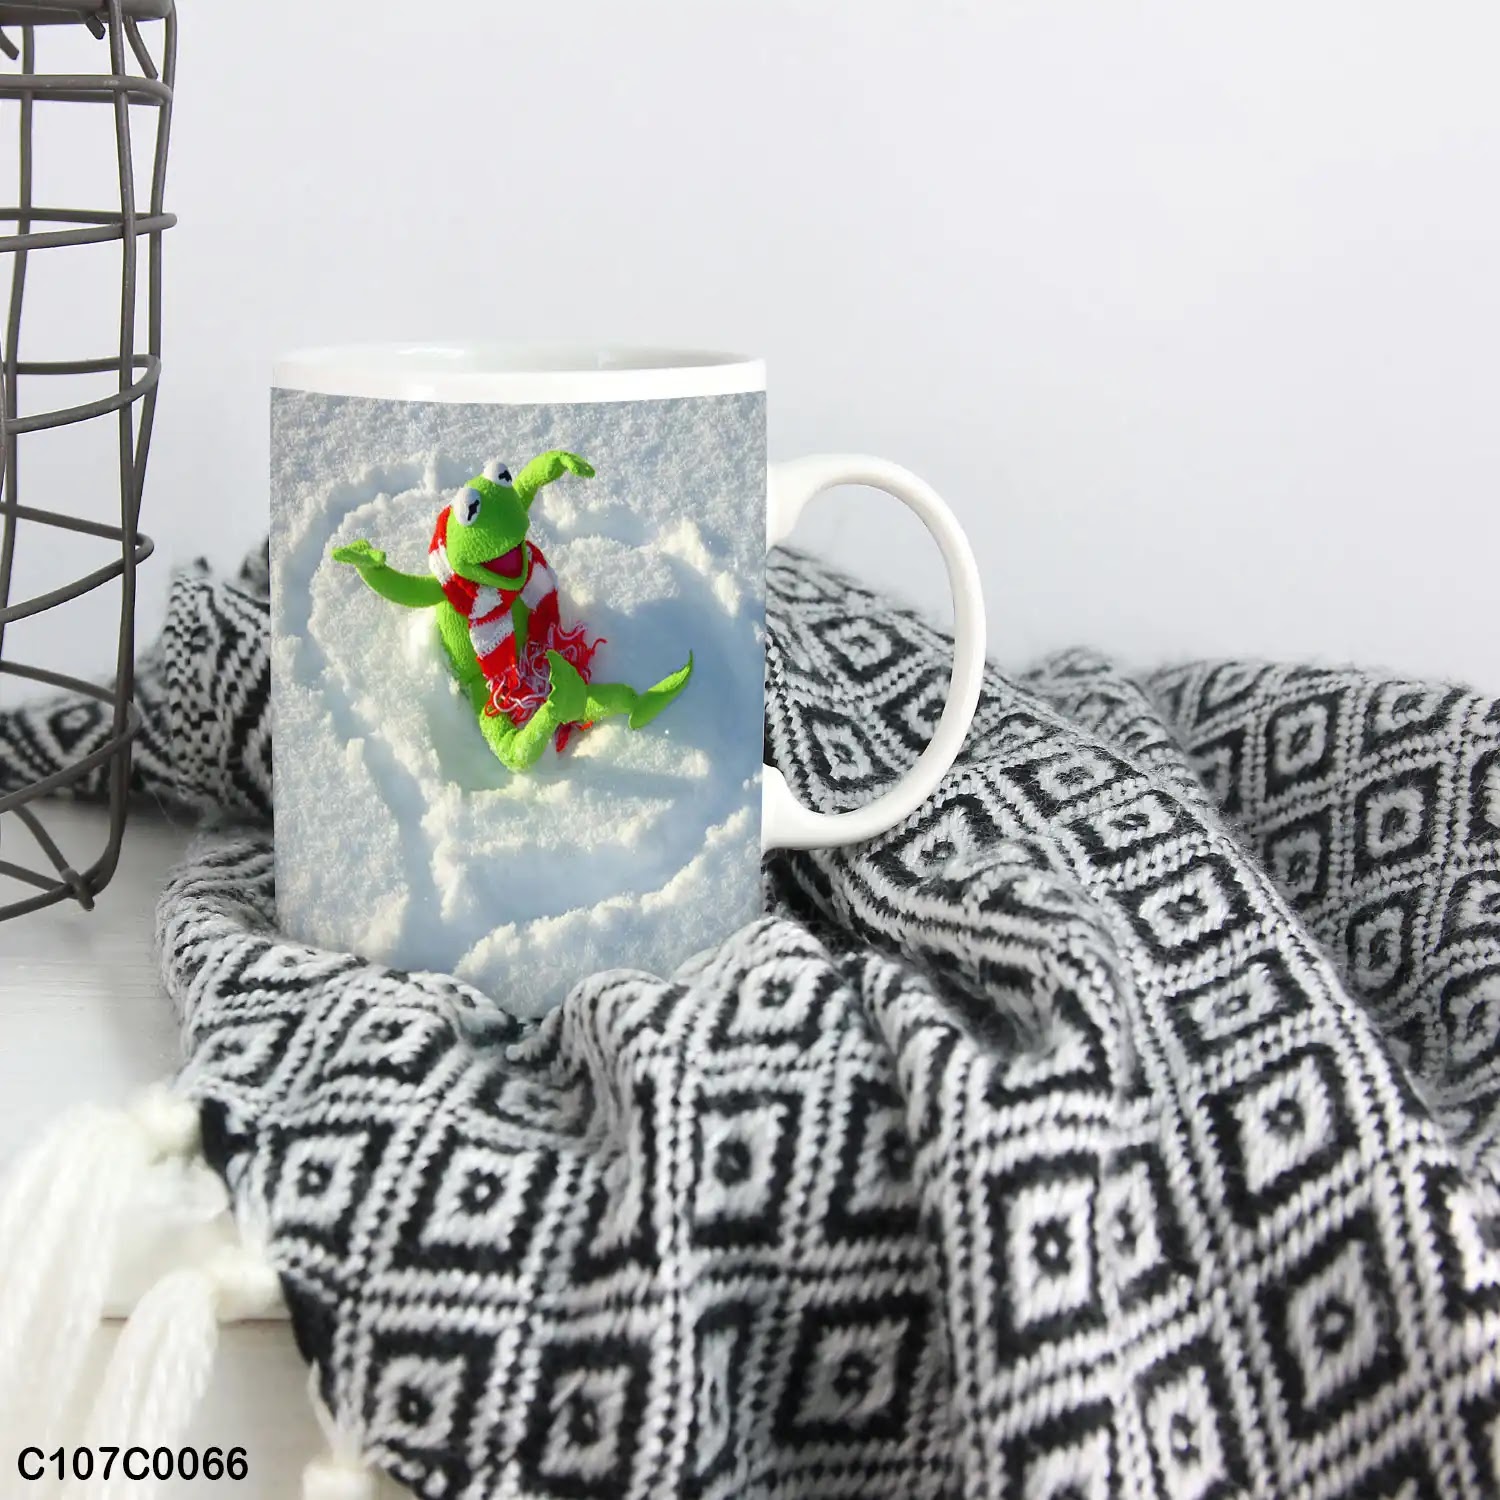 A mug (cup) printed with an image of a frog playing over a snow